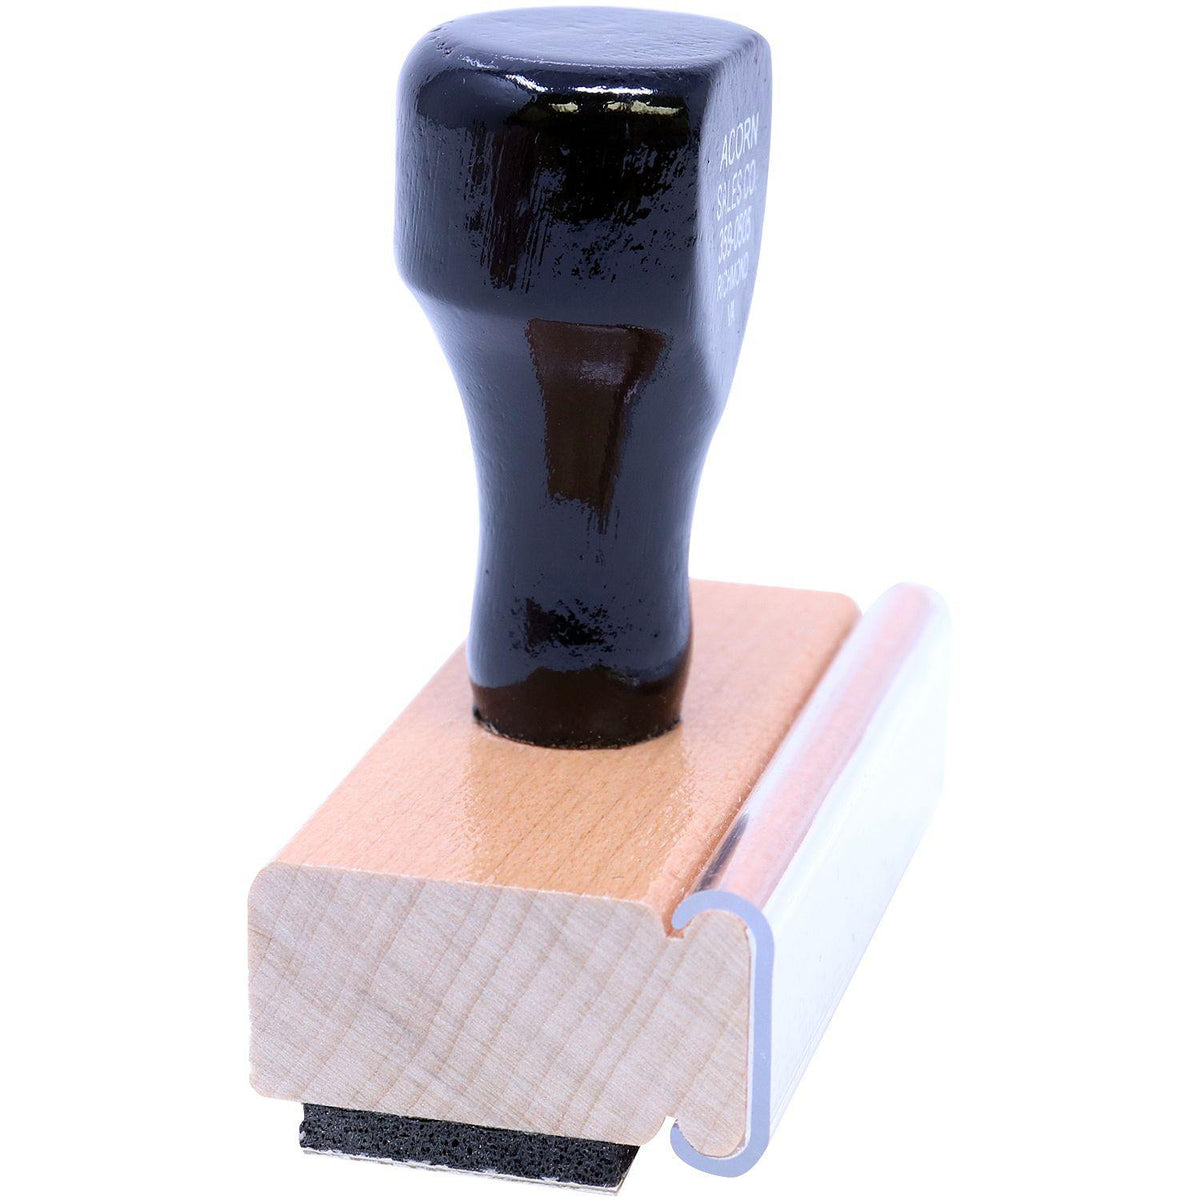 Medicare And Insurance Rubber Stamp - Engineer Seal Stamps - Brand_Acorn, Impression Size_Small, Stamp Type_Regular Stamp, Type of Use_Medical Office